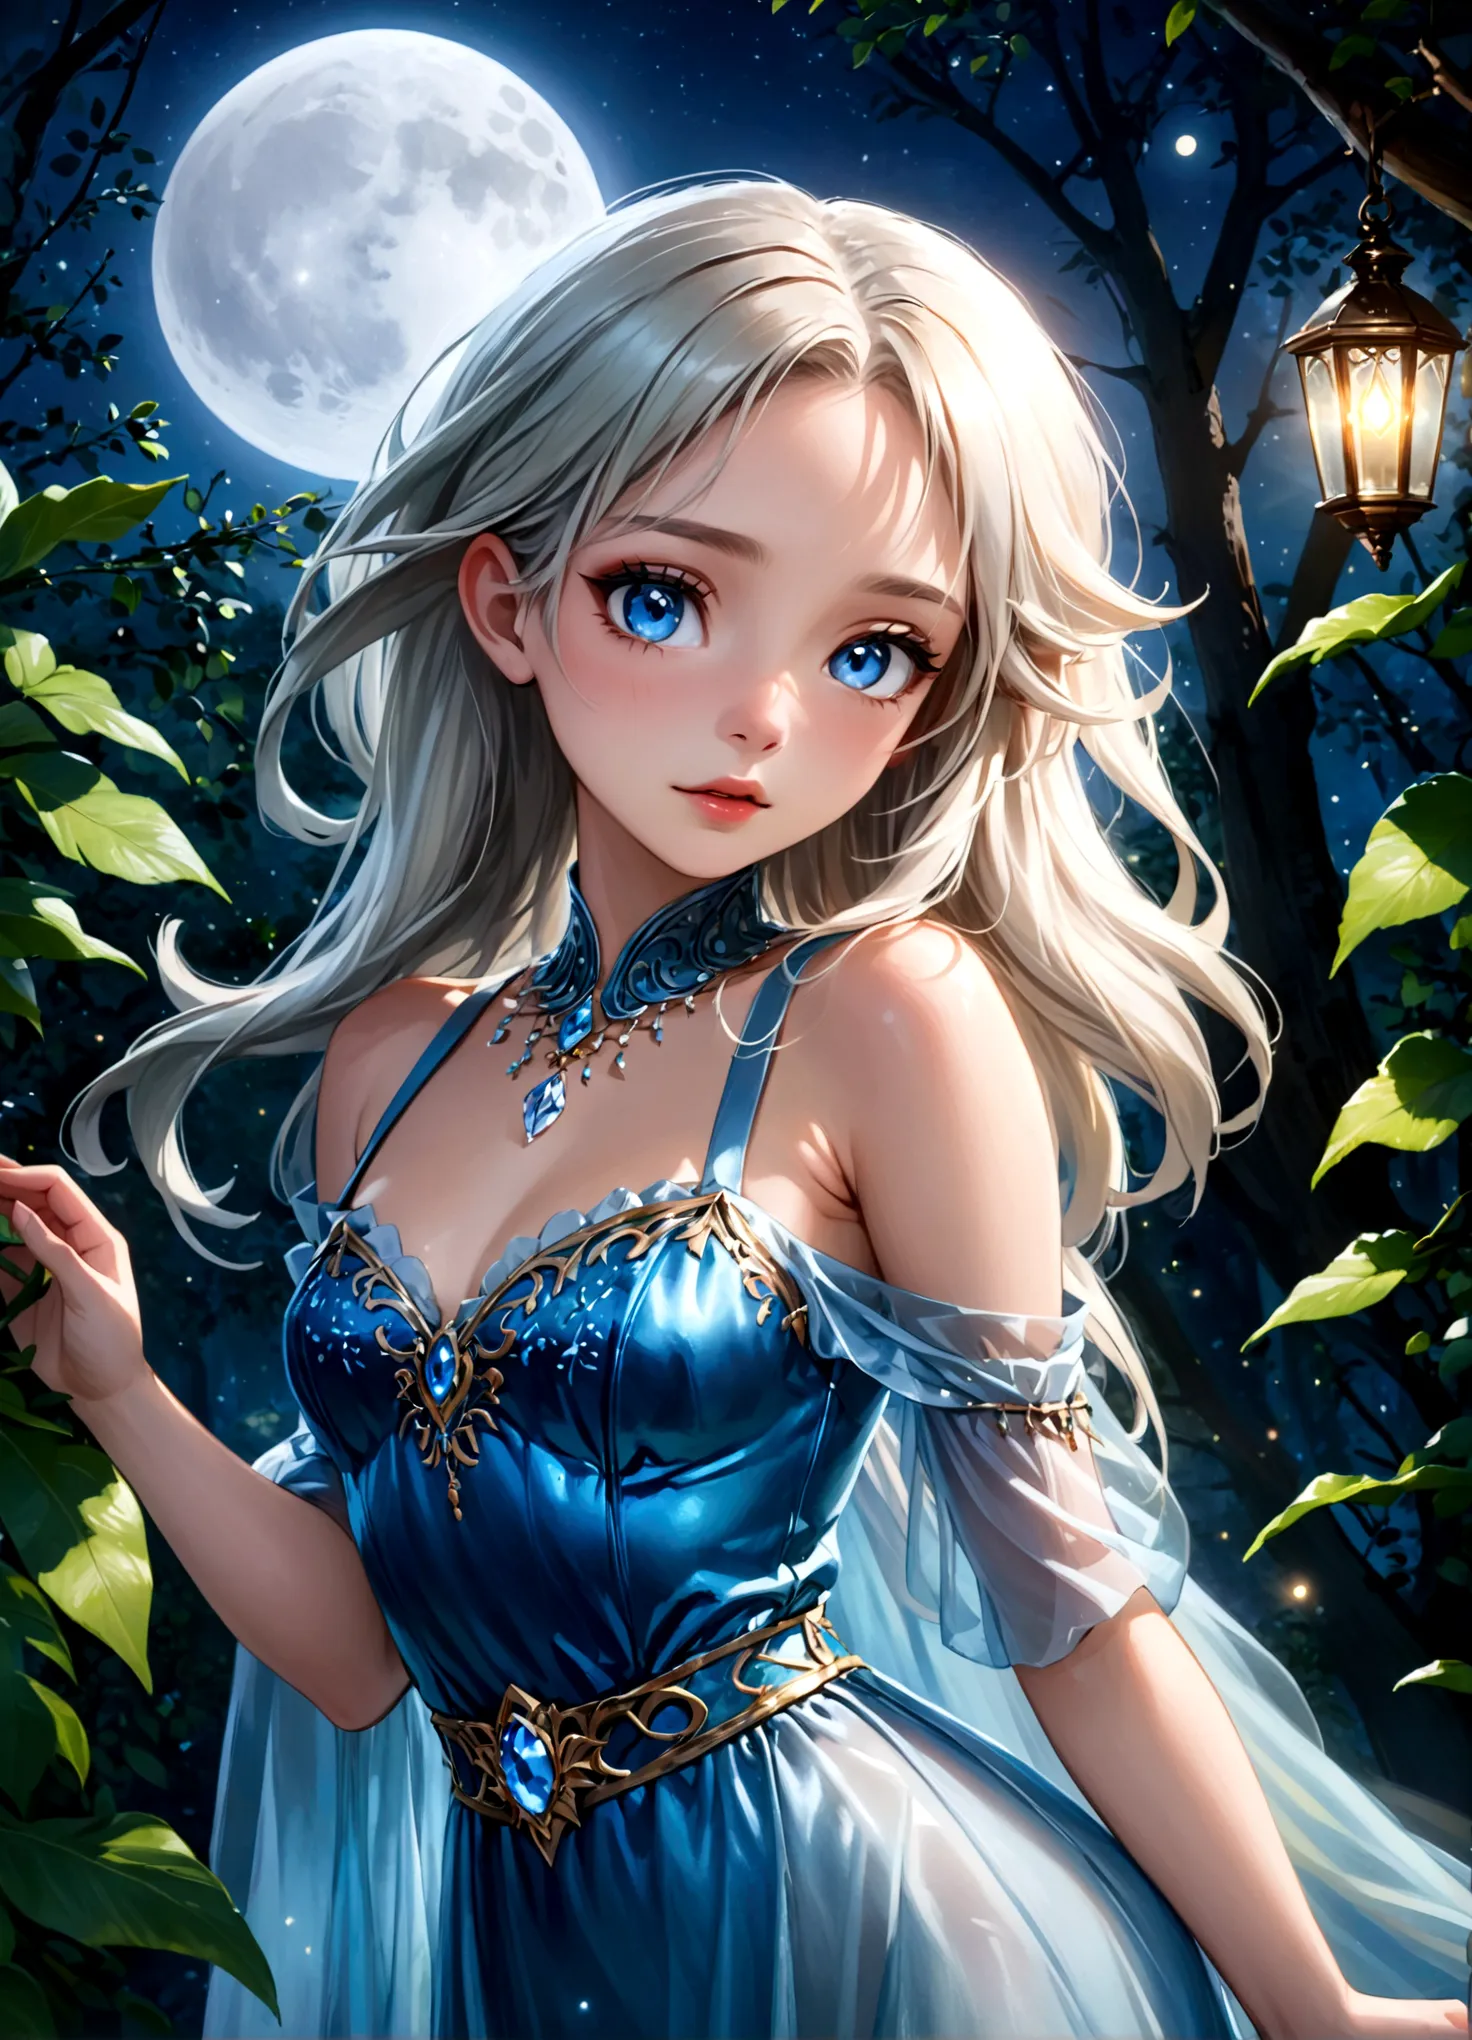 A beautiful young moon elf with waist-length hair, pale skin, and crystal blue eyes, wearing a sheer crystal silk evening gown, ...